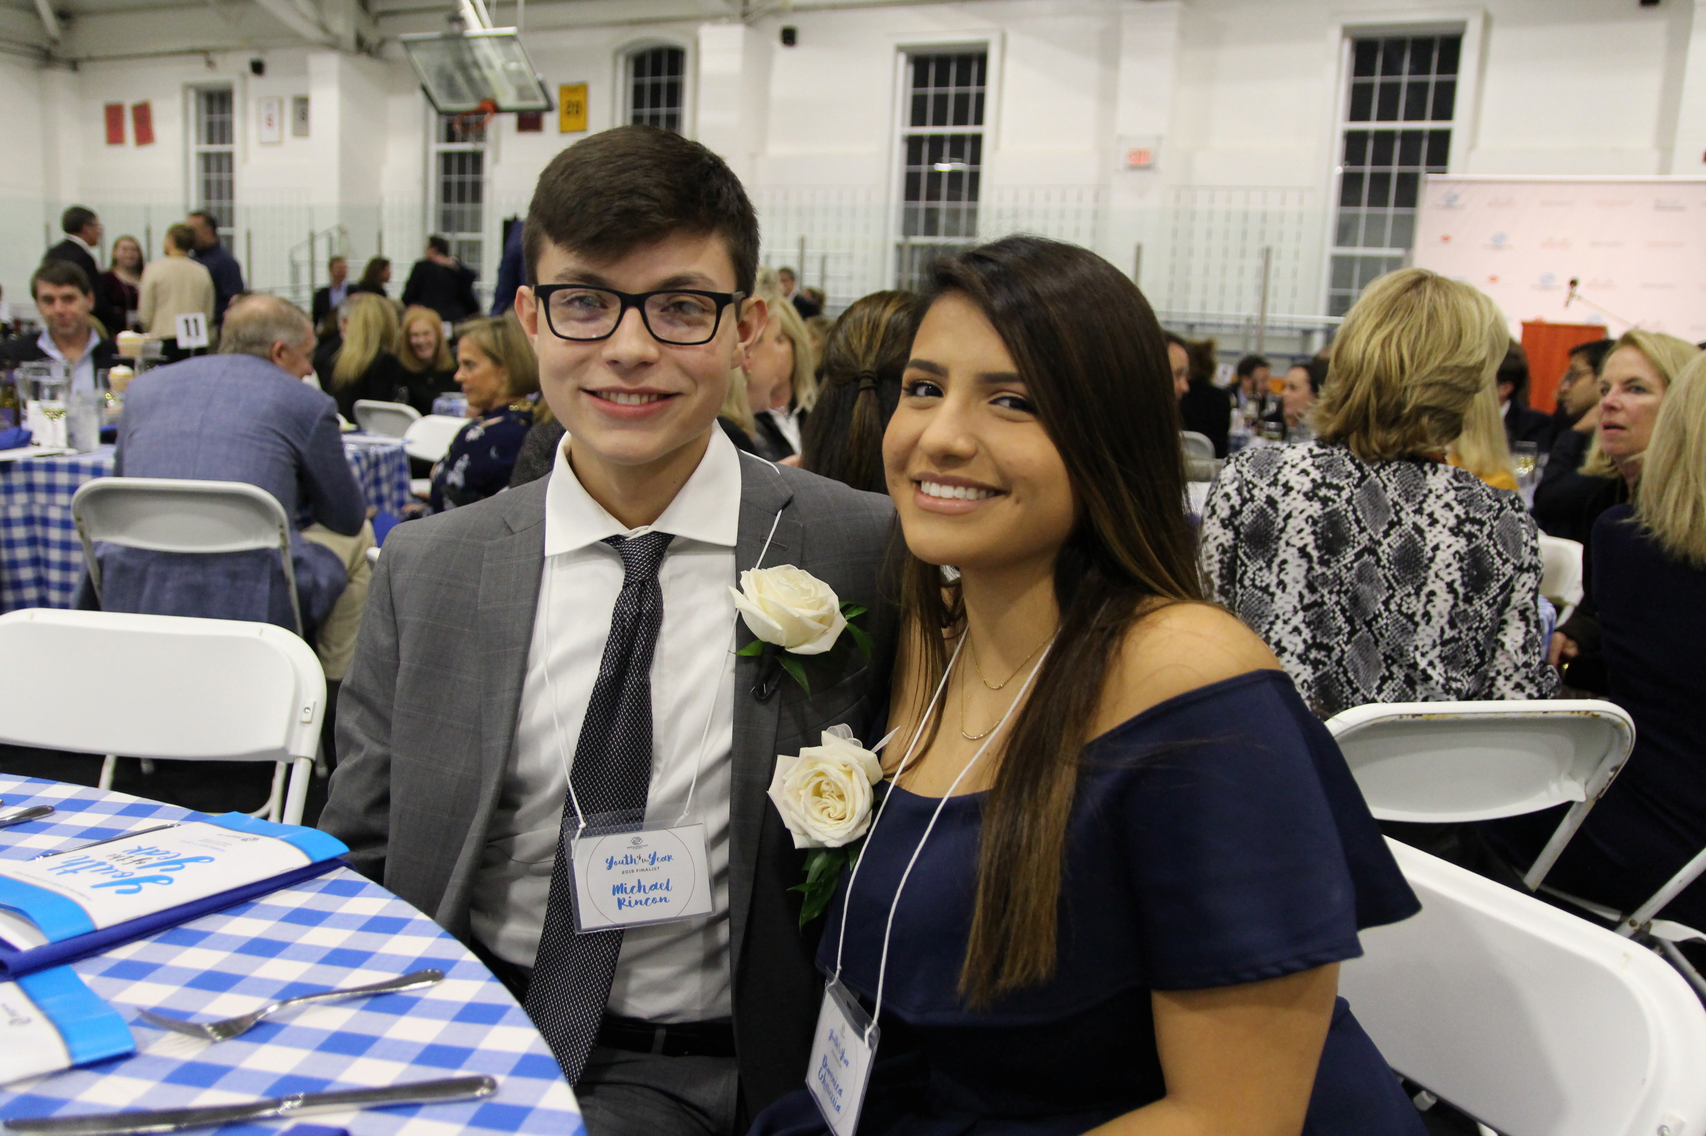 2019 Youth of the Year Michael Rincon with 2018 winner Domenica Echeverria at the Club on Feb 7, 2019 Photo: Leslie Yager